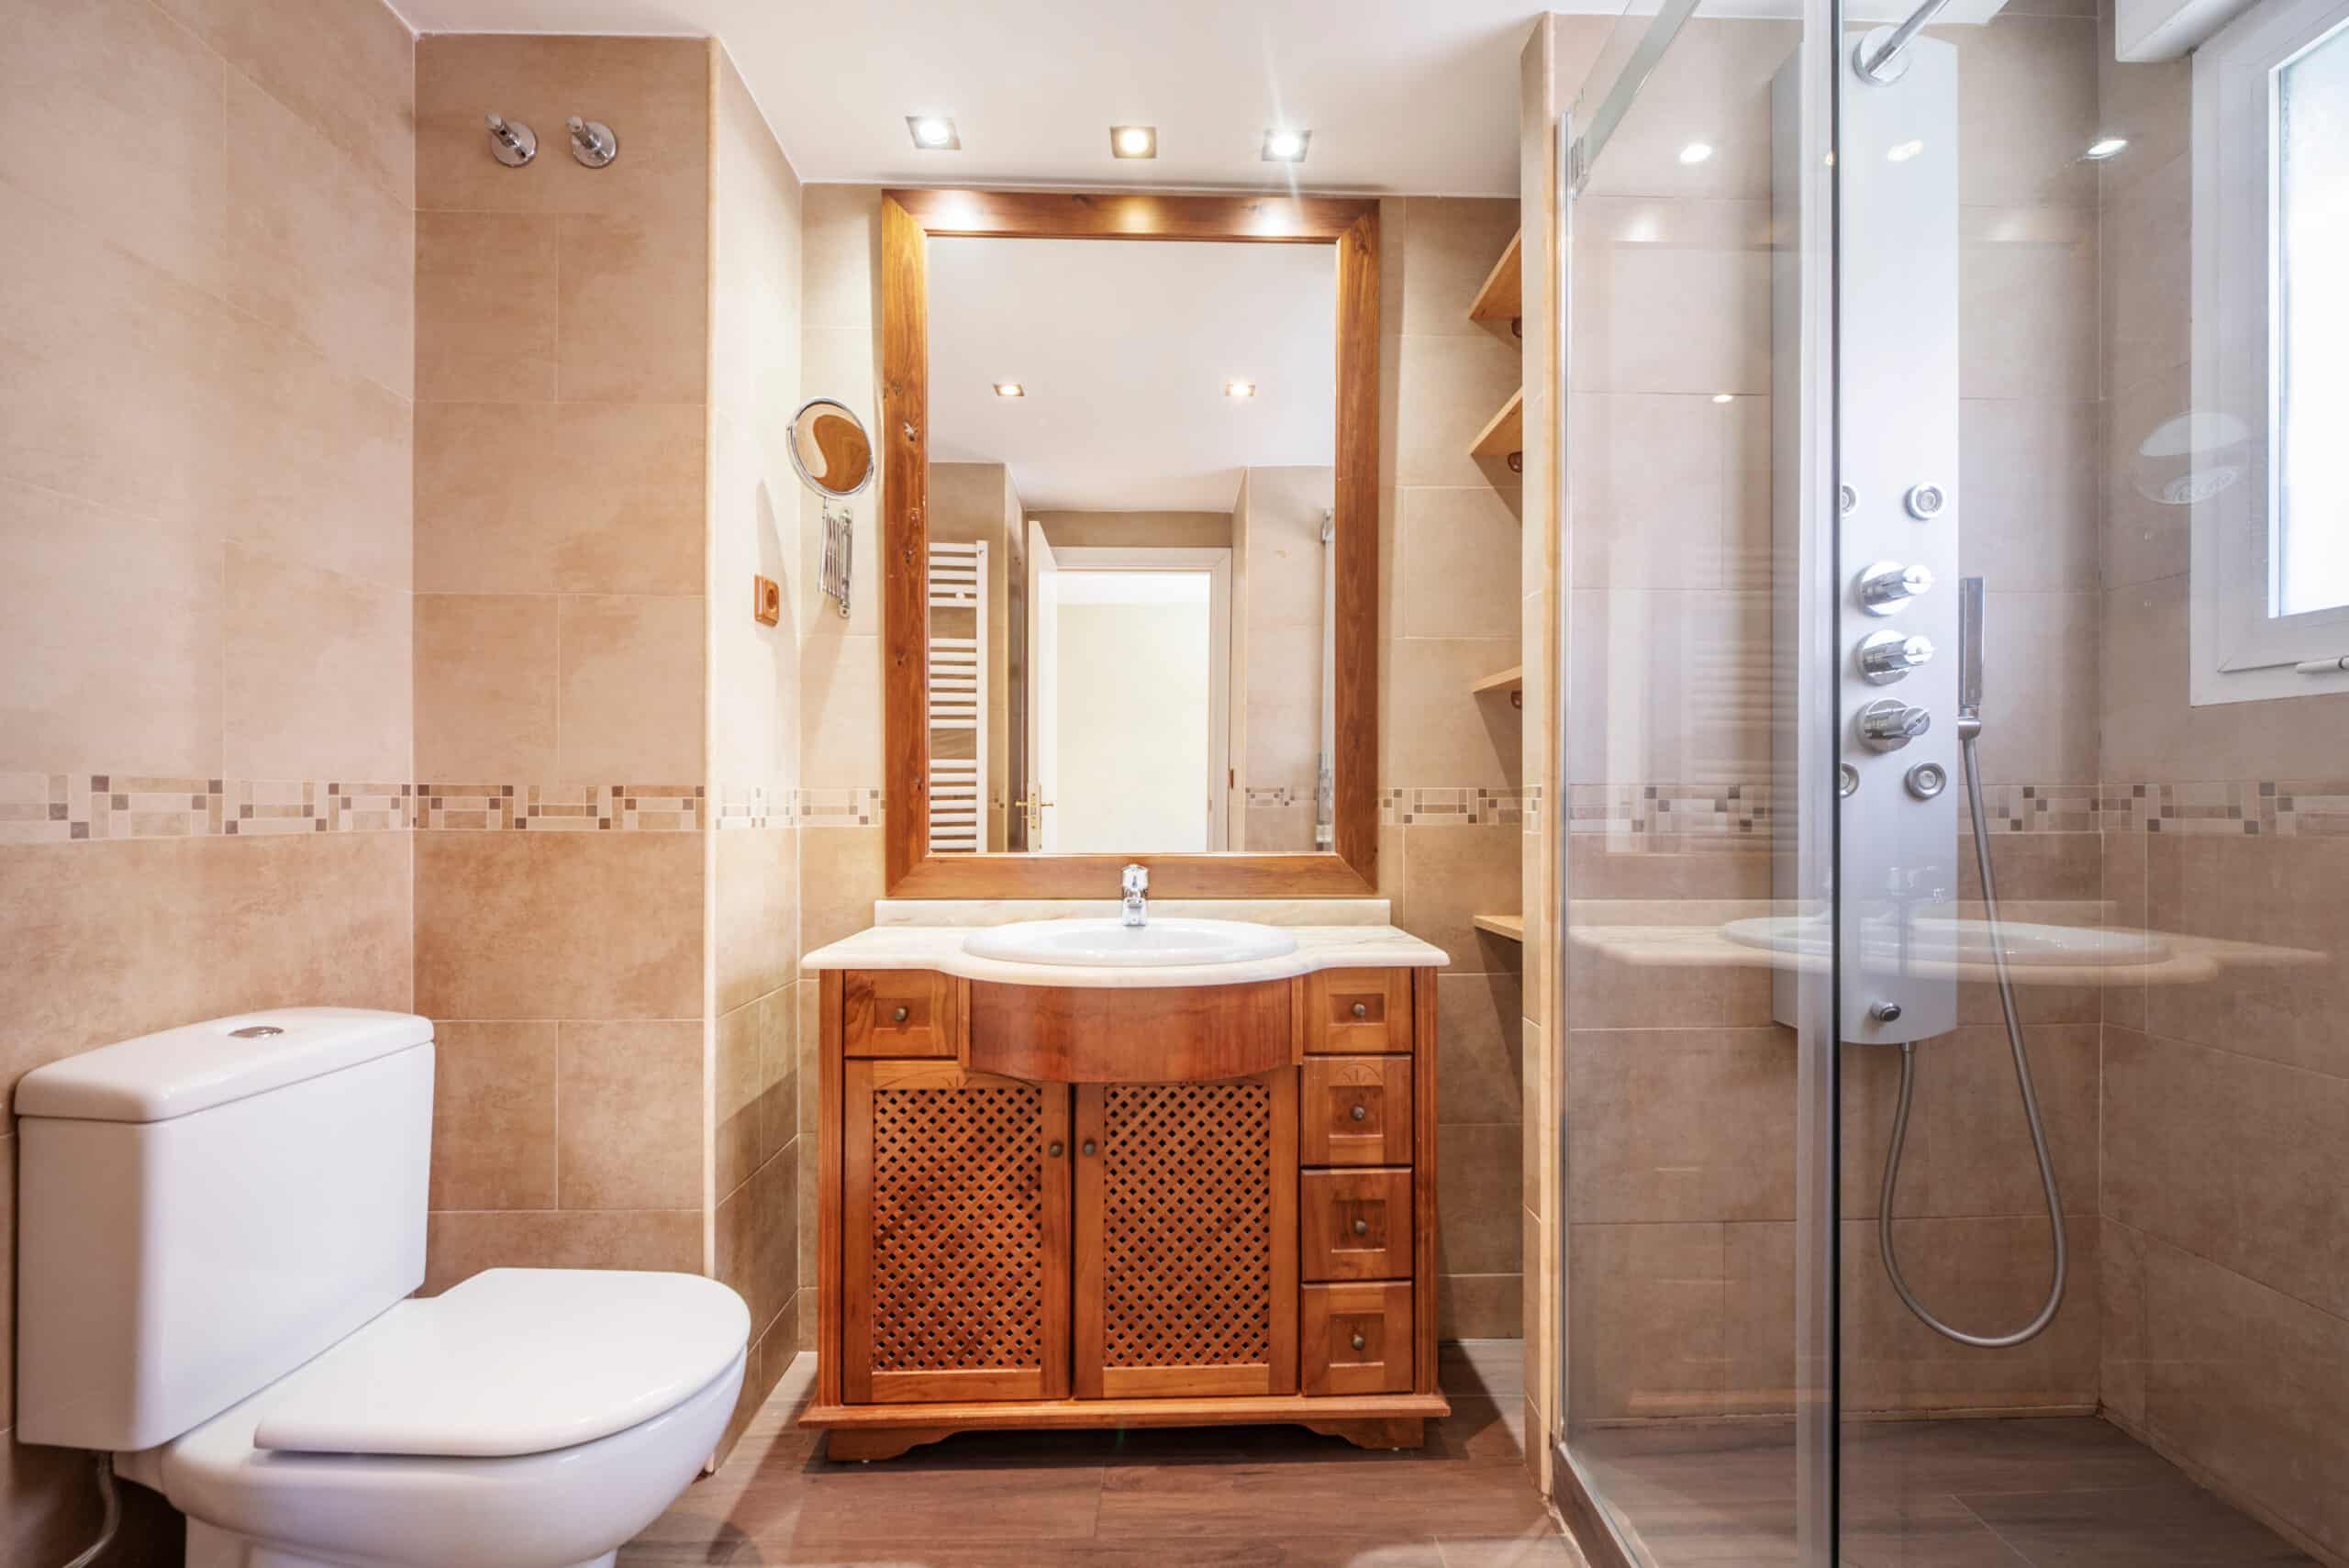 toilet with wooden slatted cabinet, rectangular mirror and steam jet shower